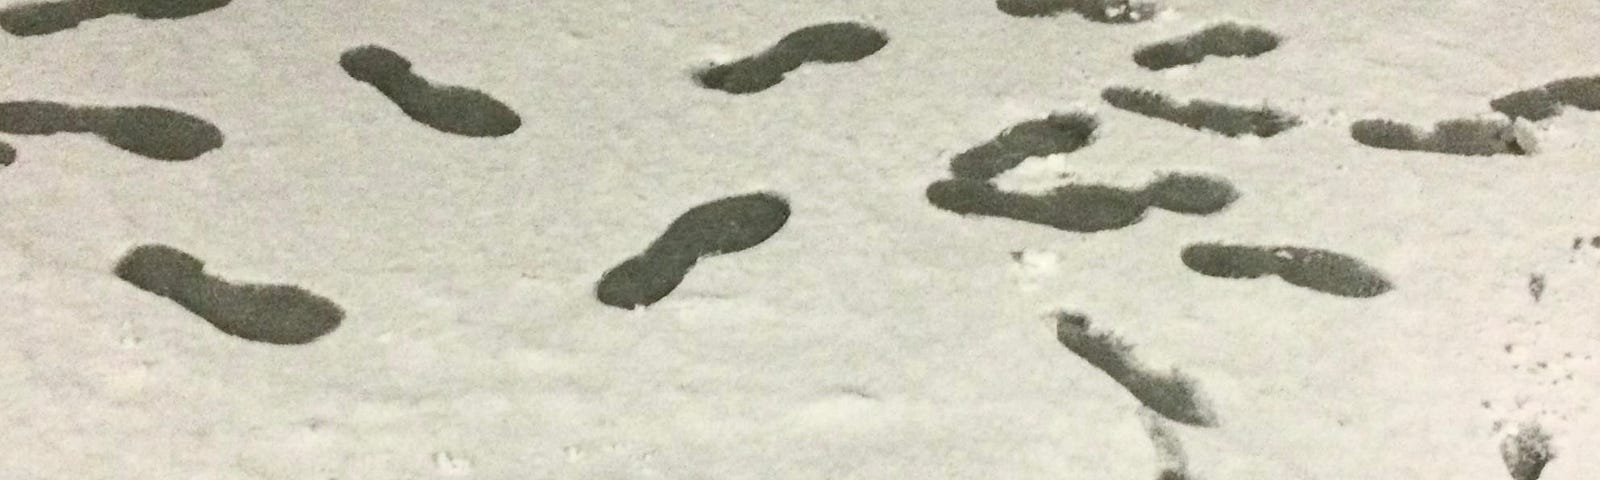 Footprints and family name: Mehta’s on a sheet of snow.